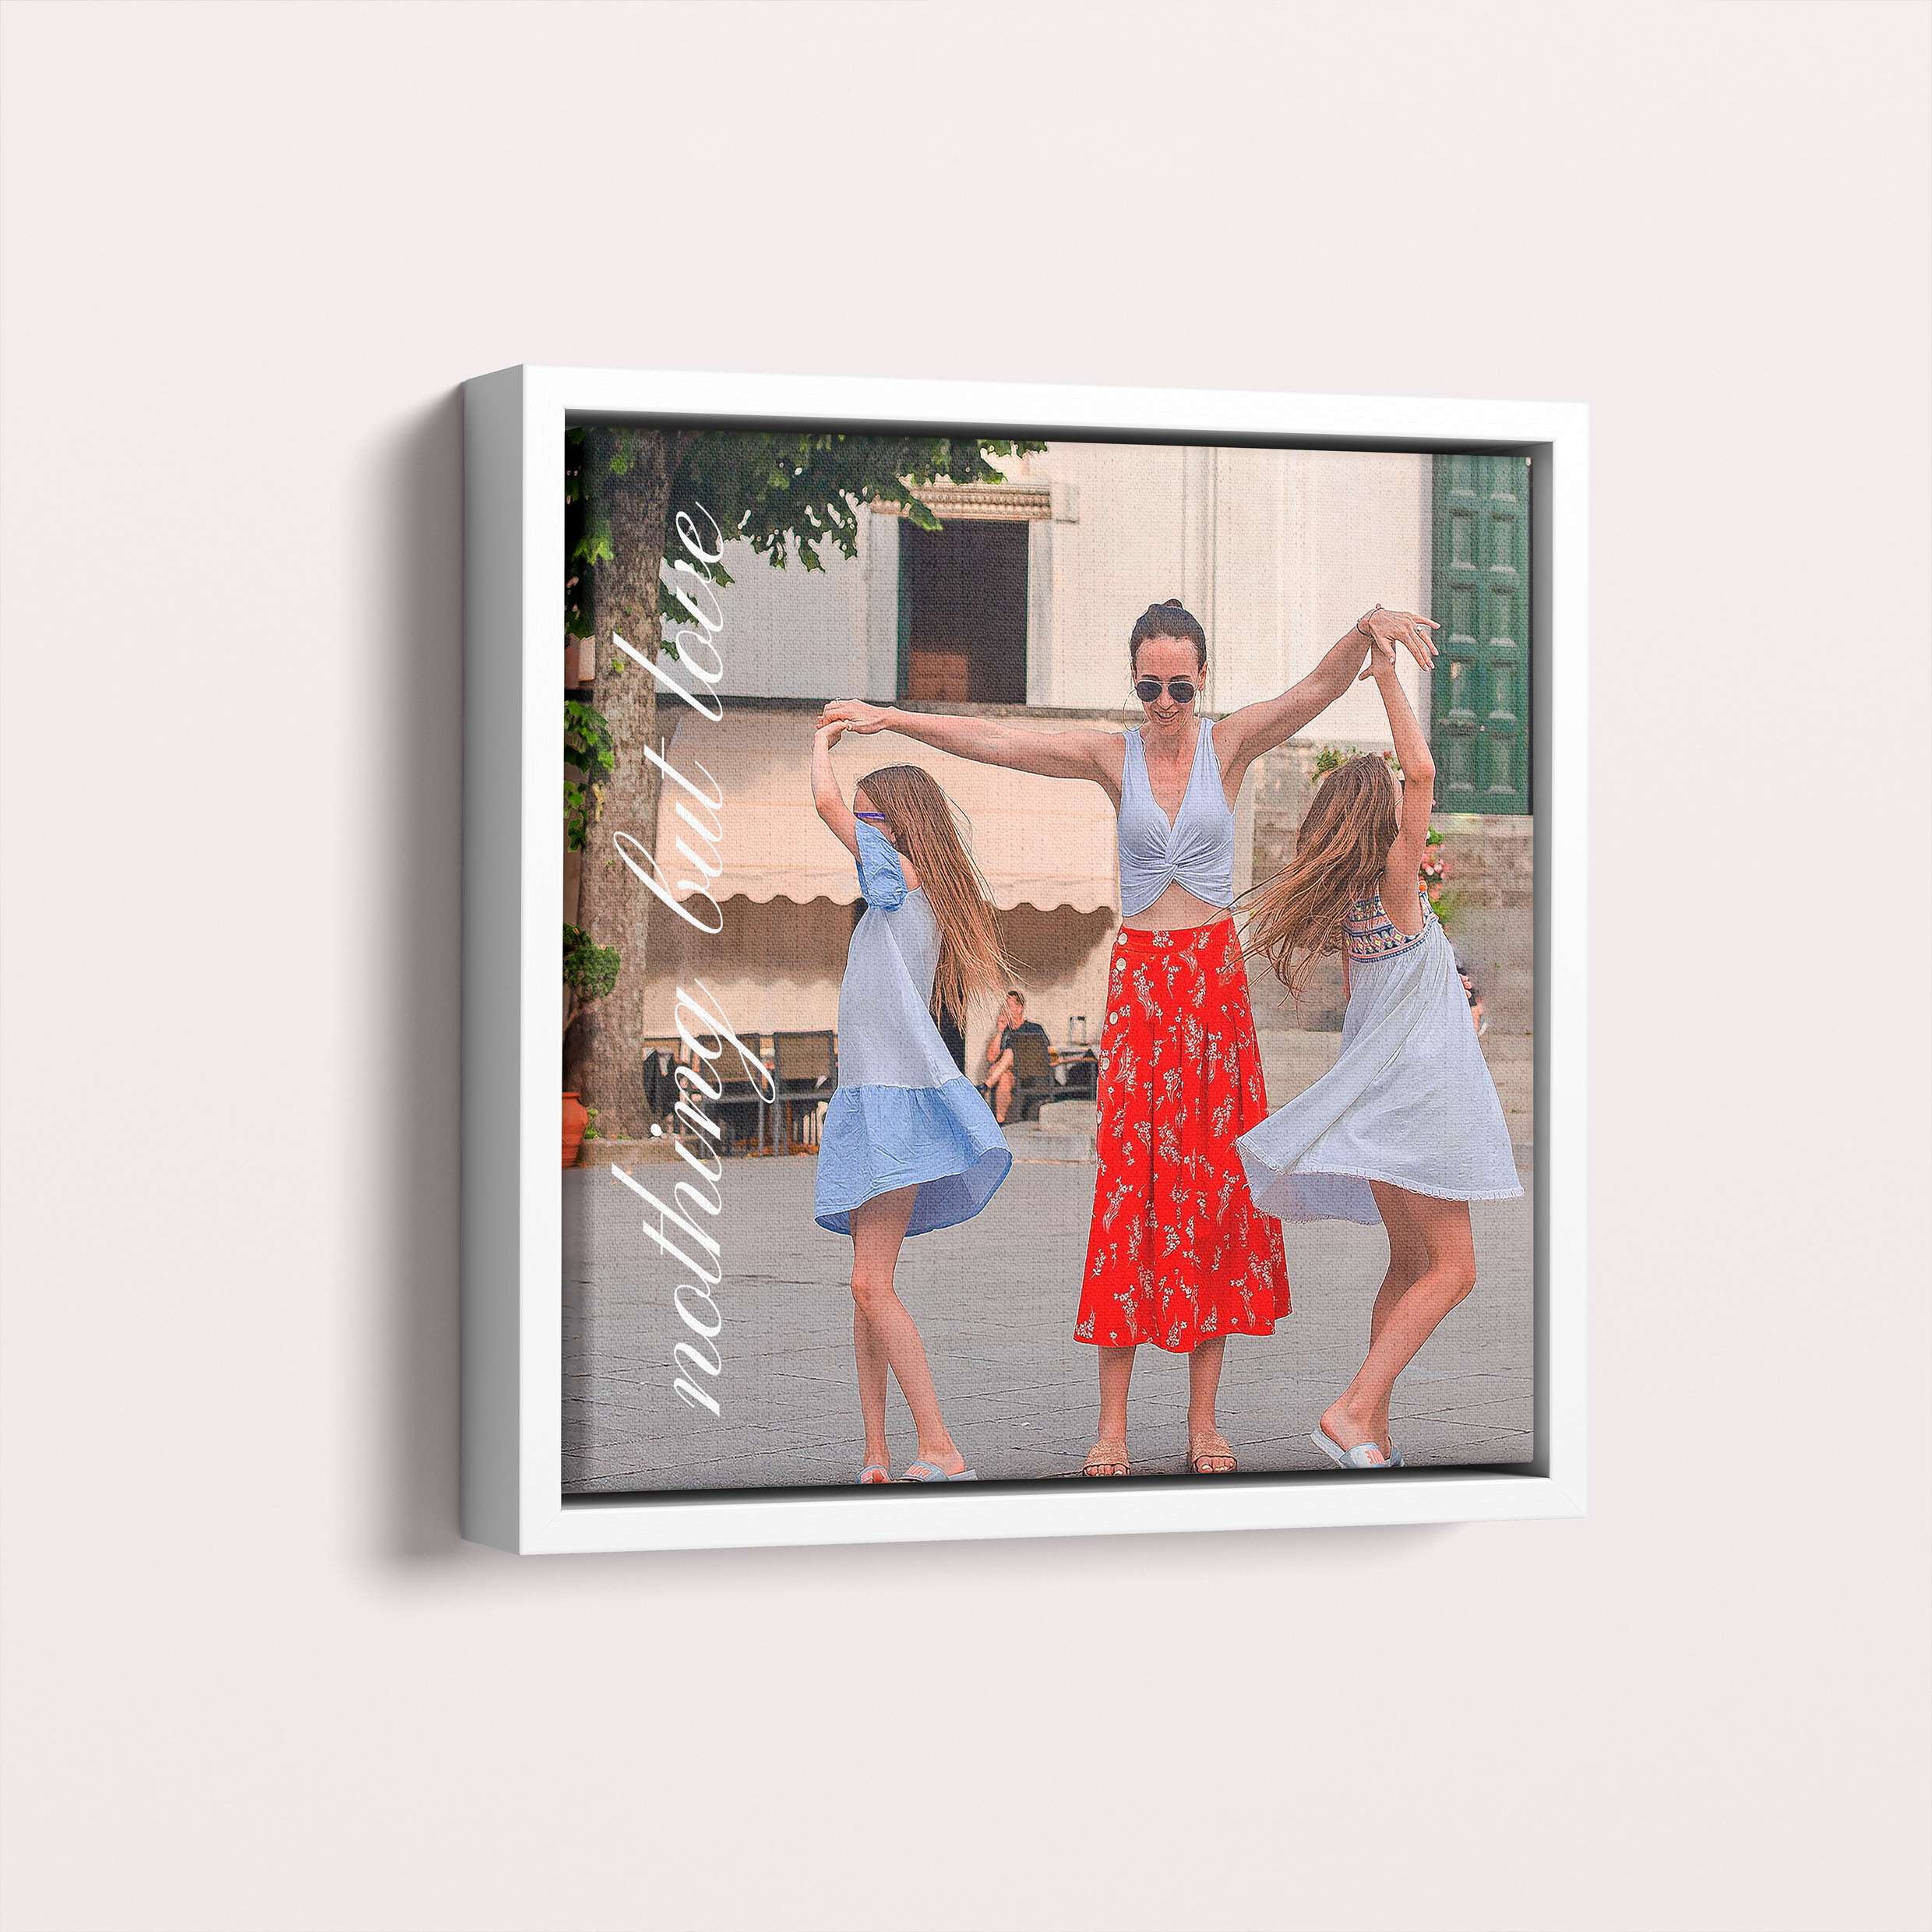  Personalized Nurturing Moments Framed Photo Canvas - Preserve special memories with this portrait-oriented canvas crafted with durable polyester and sustainably sourced wood.